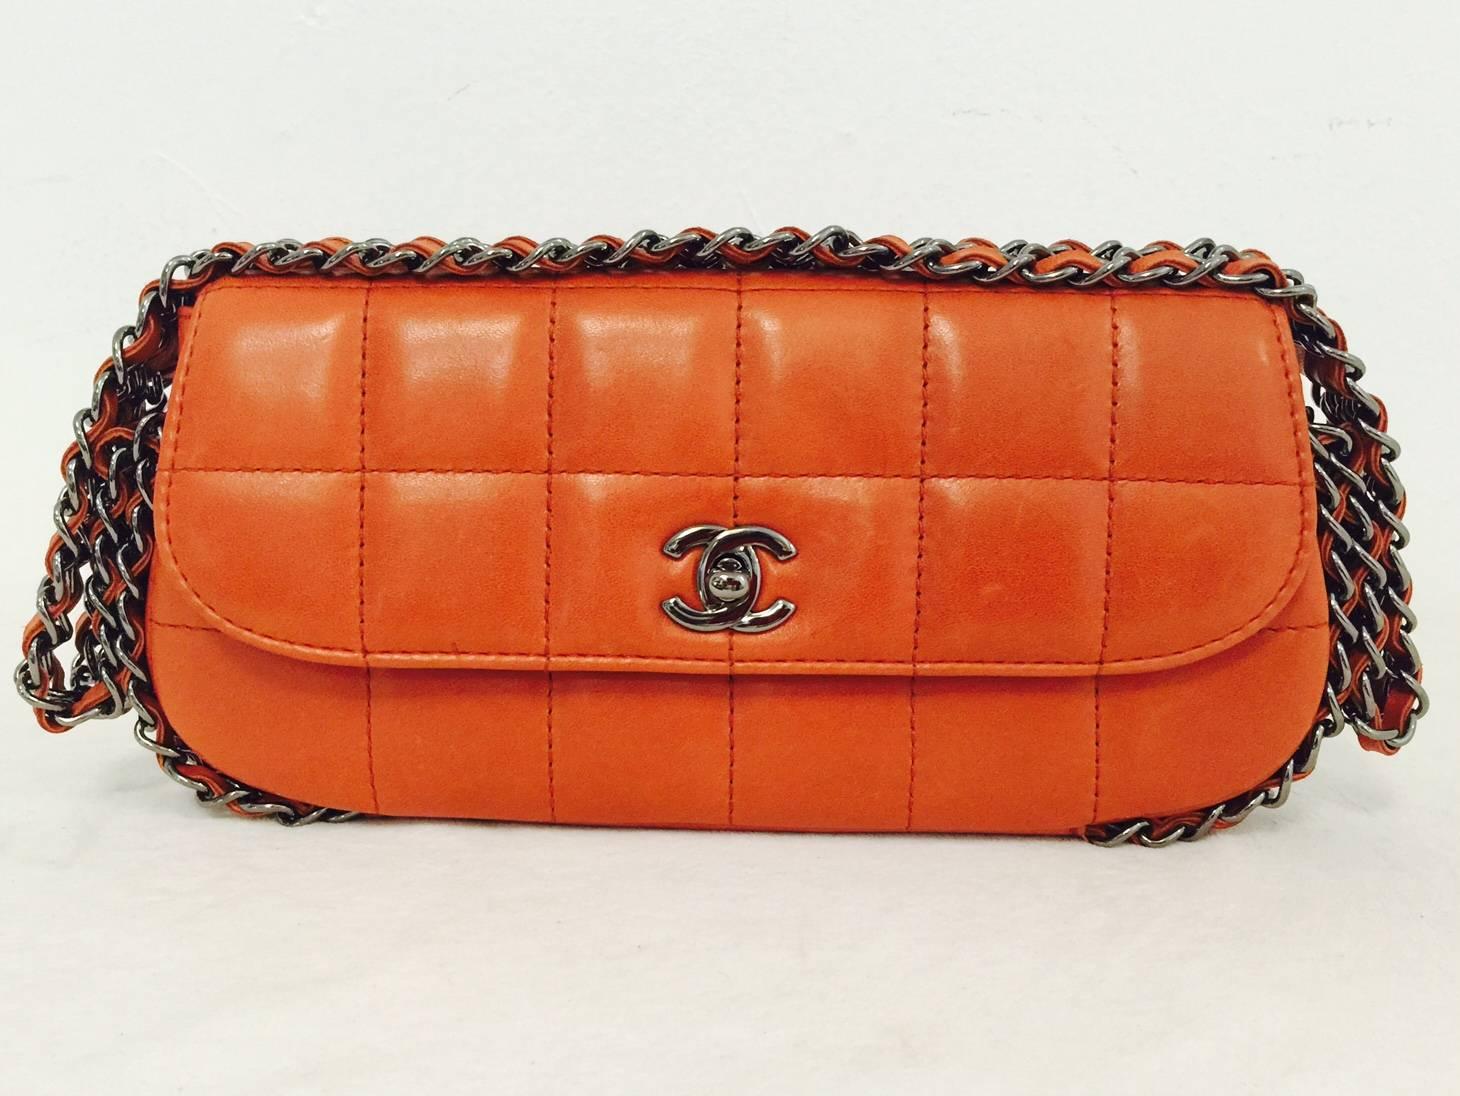  Box Quilted Lambskin Flap Bag proves that Chanel is so much more than diamond quilted flap bags!  Features supple box quilted lambskin in an alluring shade of Terra Cotta and dark silver hardware.  Interior is lined in luxurious tan fabric printed